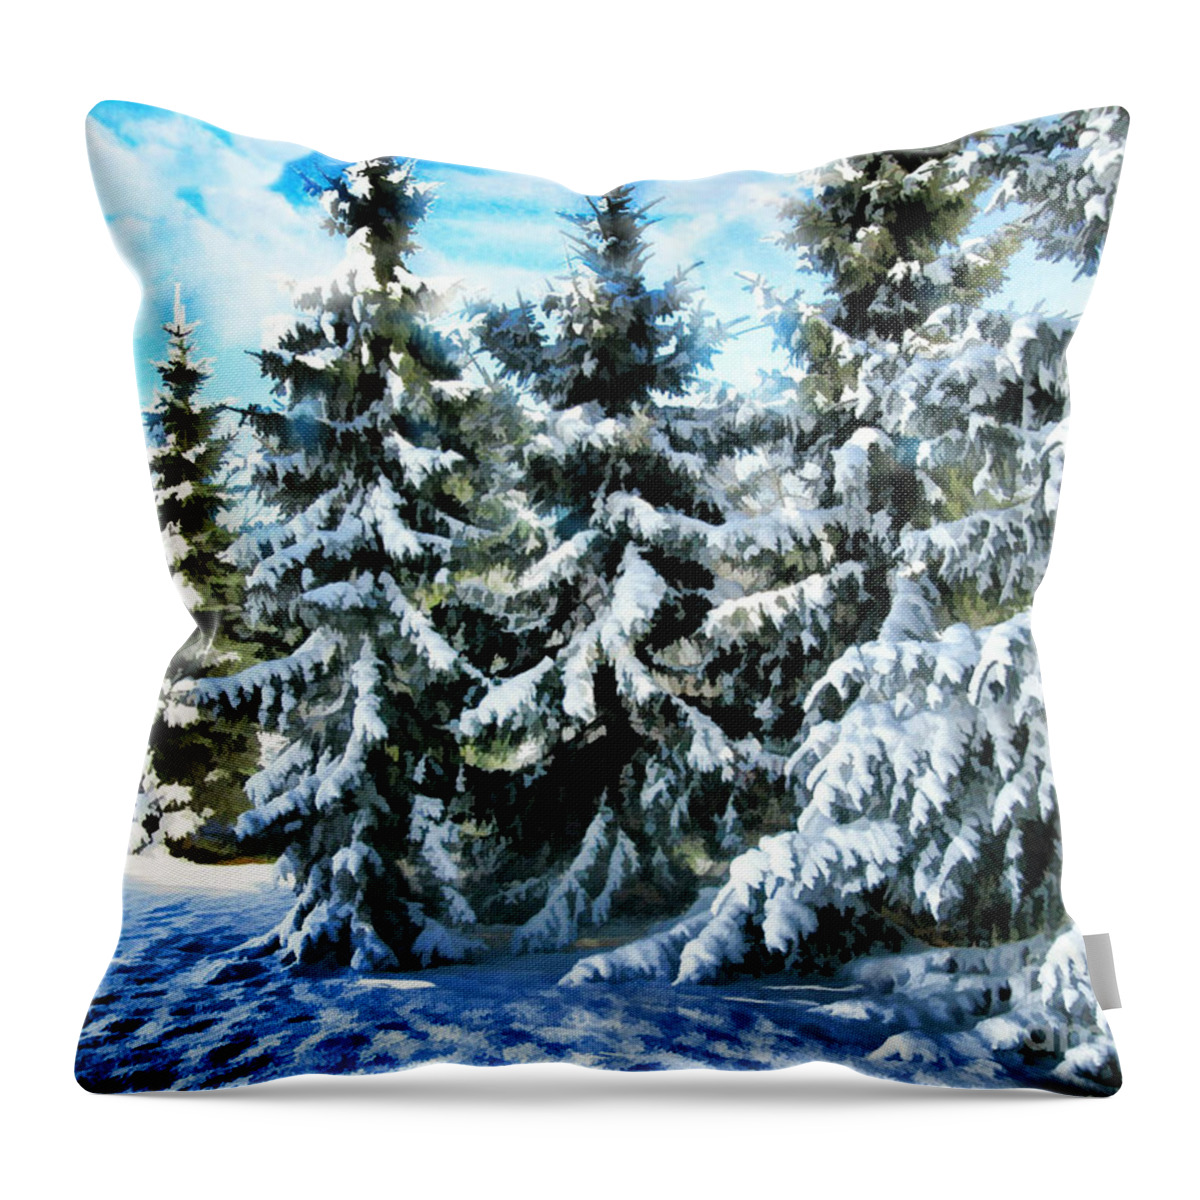 New England Throw Pillow featuring the photograph Majestic Winter In New England by Judy Palkimas